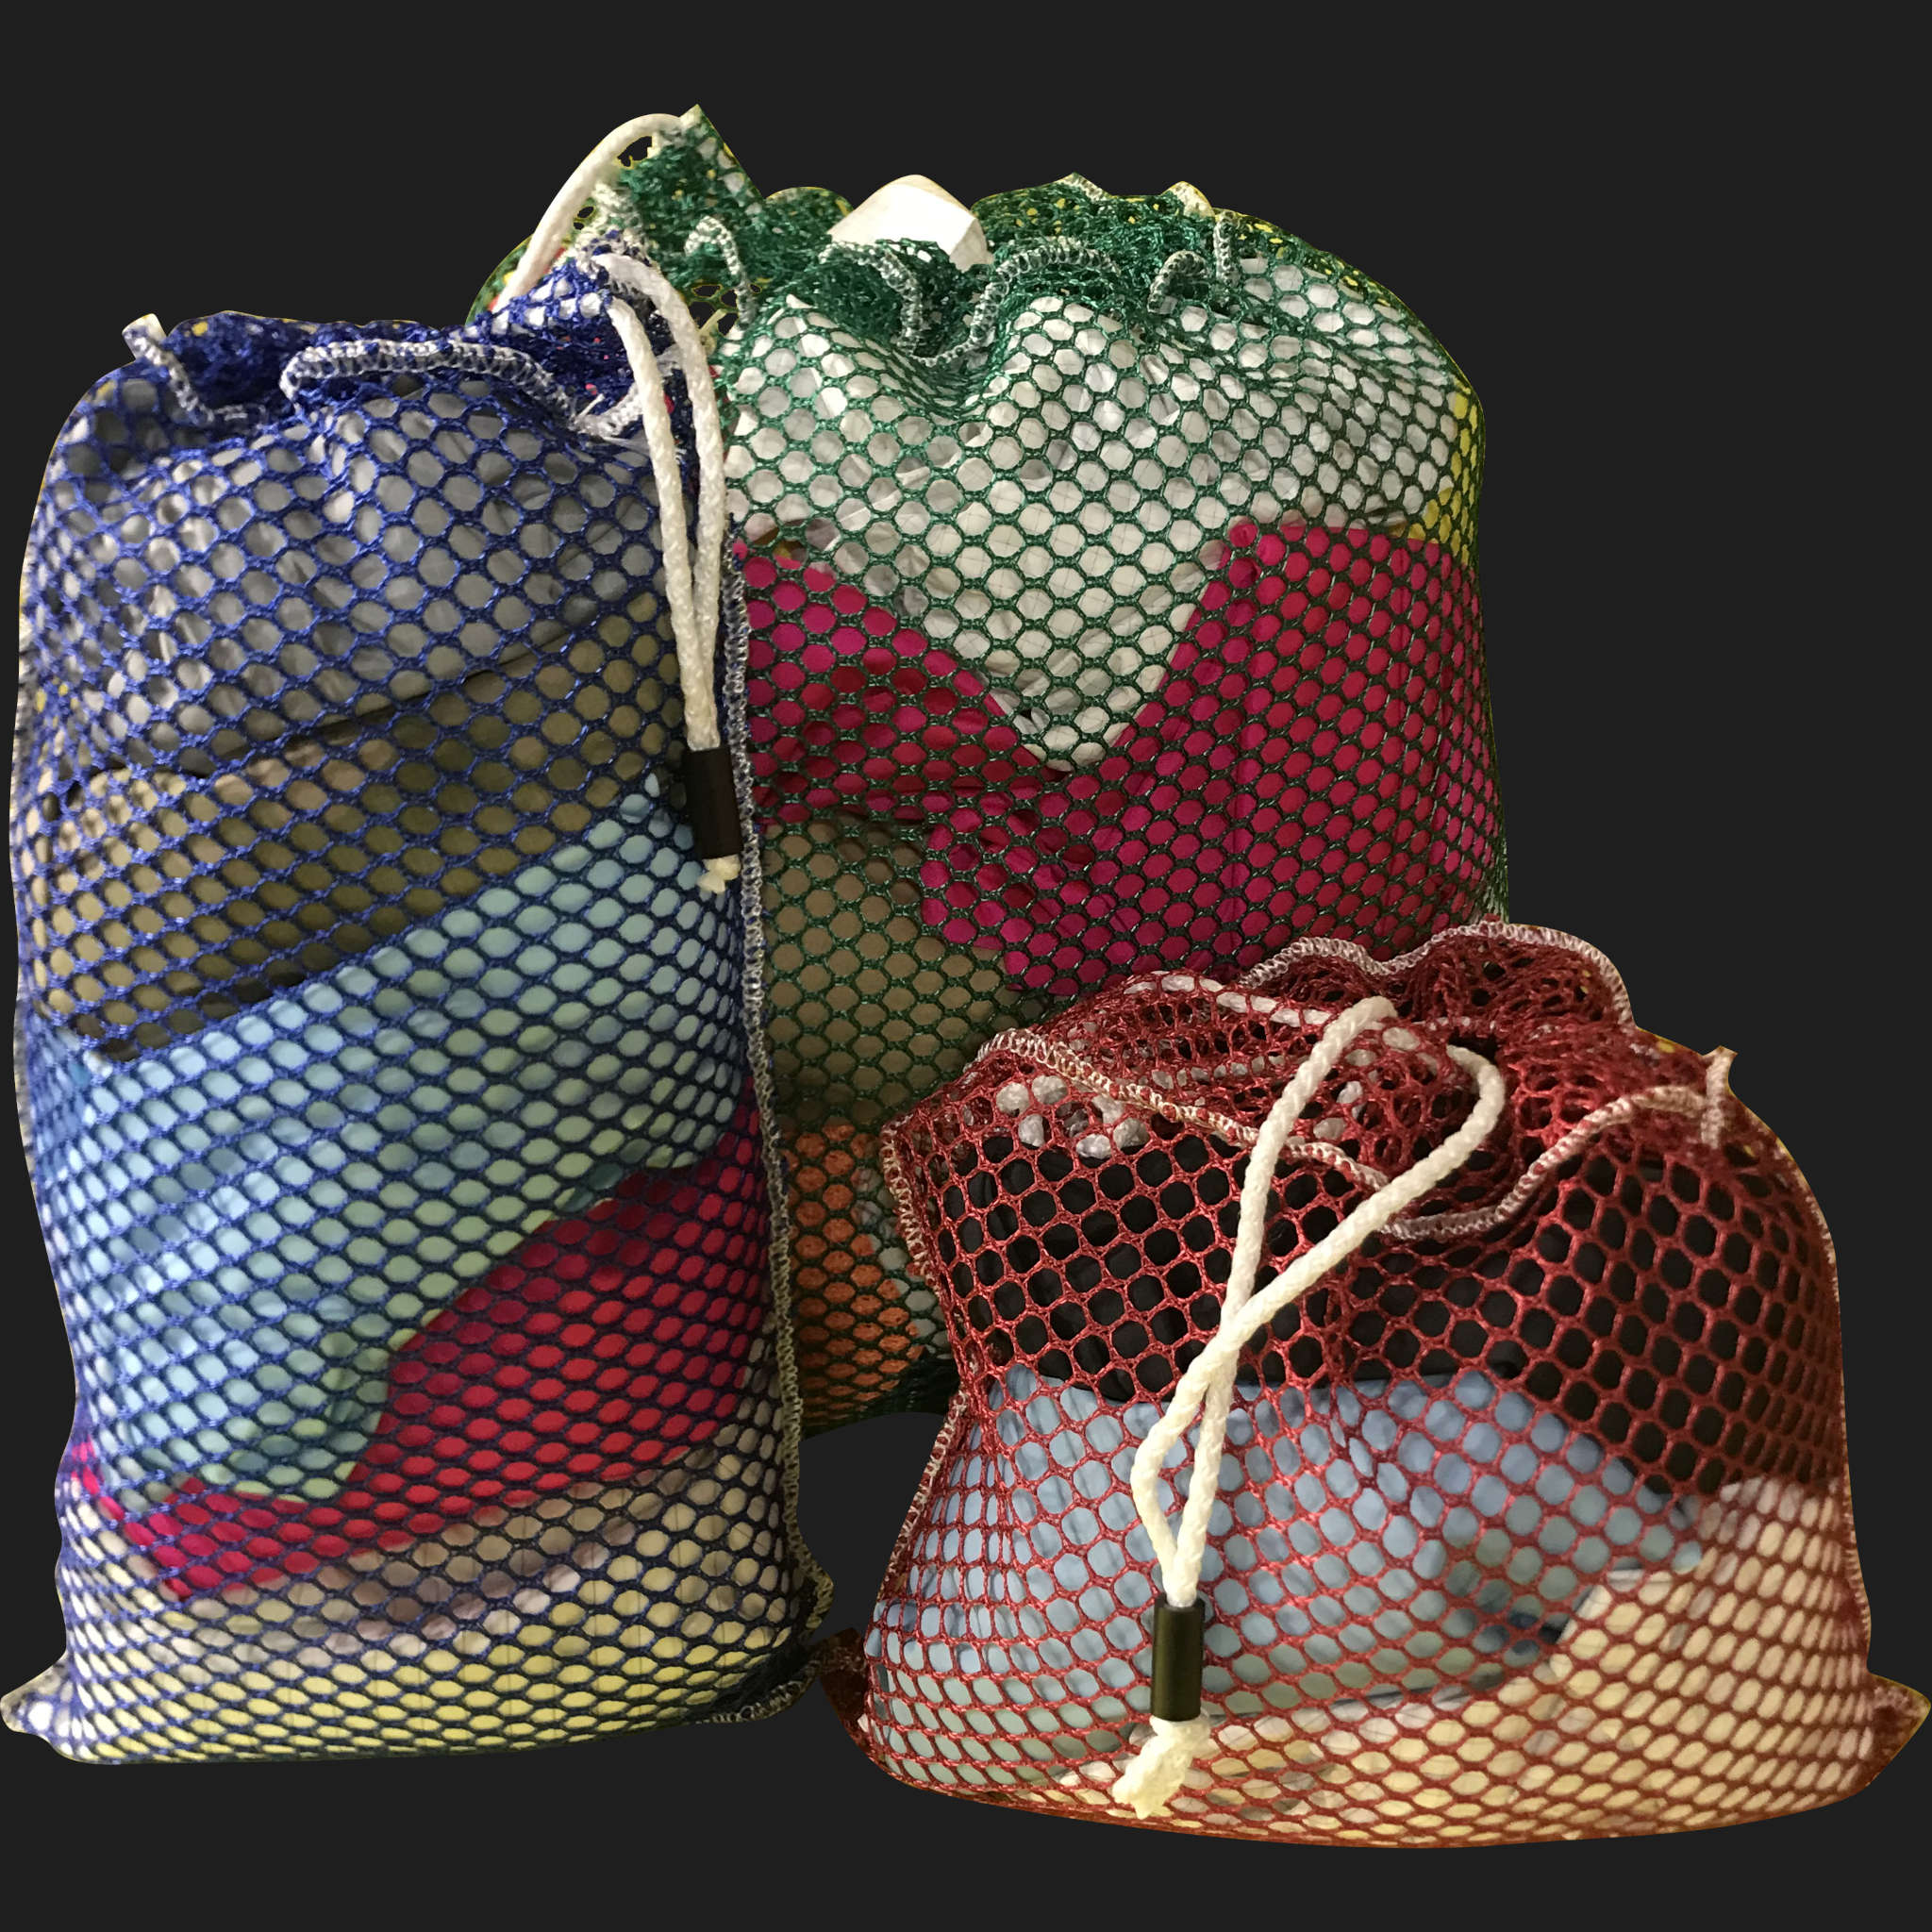 16" x 22" Customized Mesh-Net-Laundry Bags Heavy Duty with Cord and barrellock closure